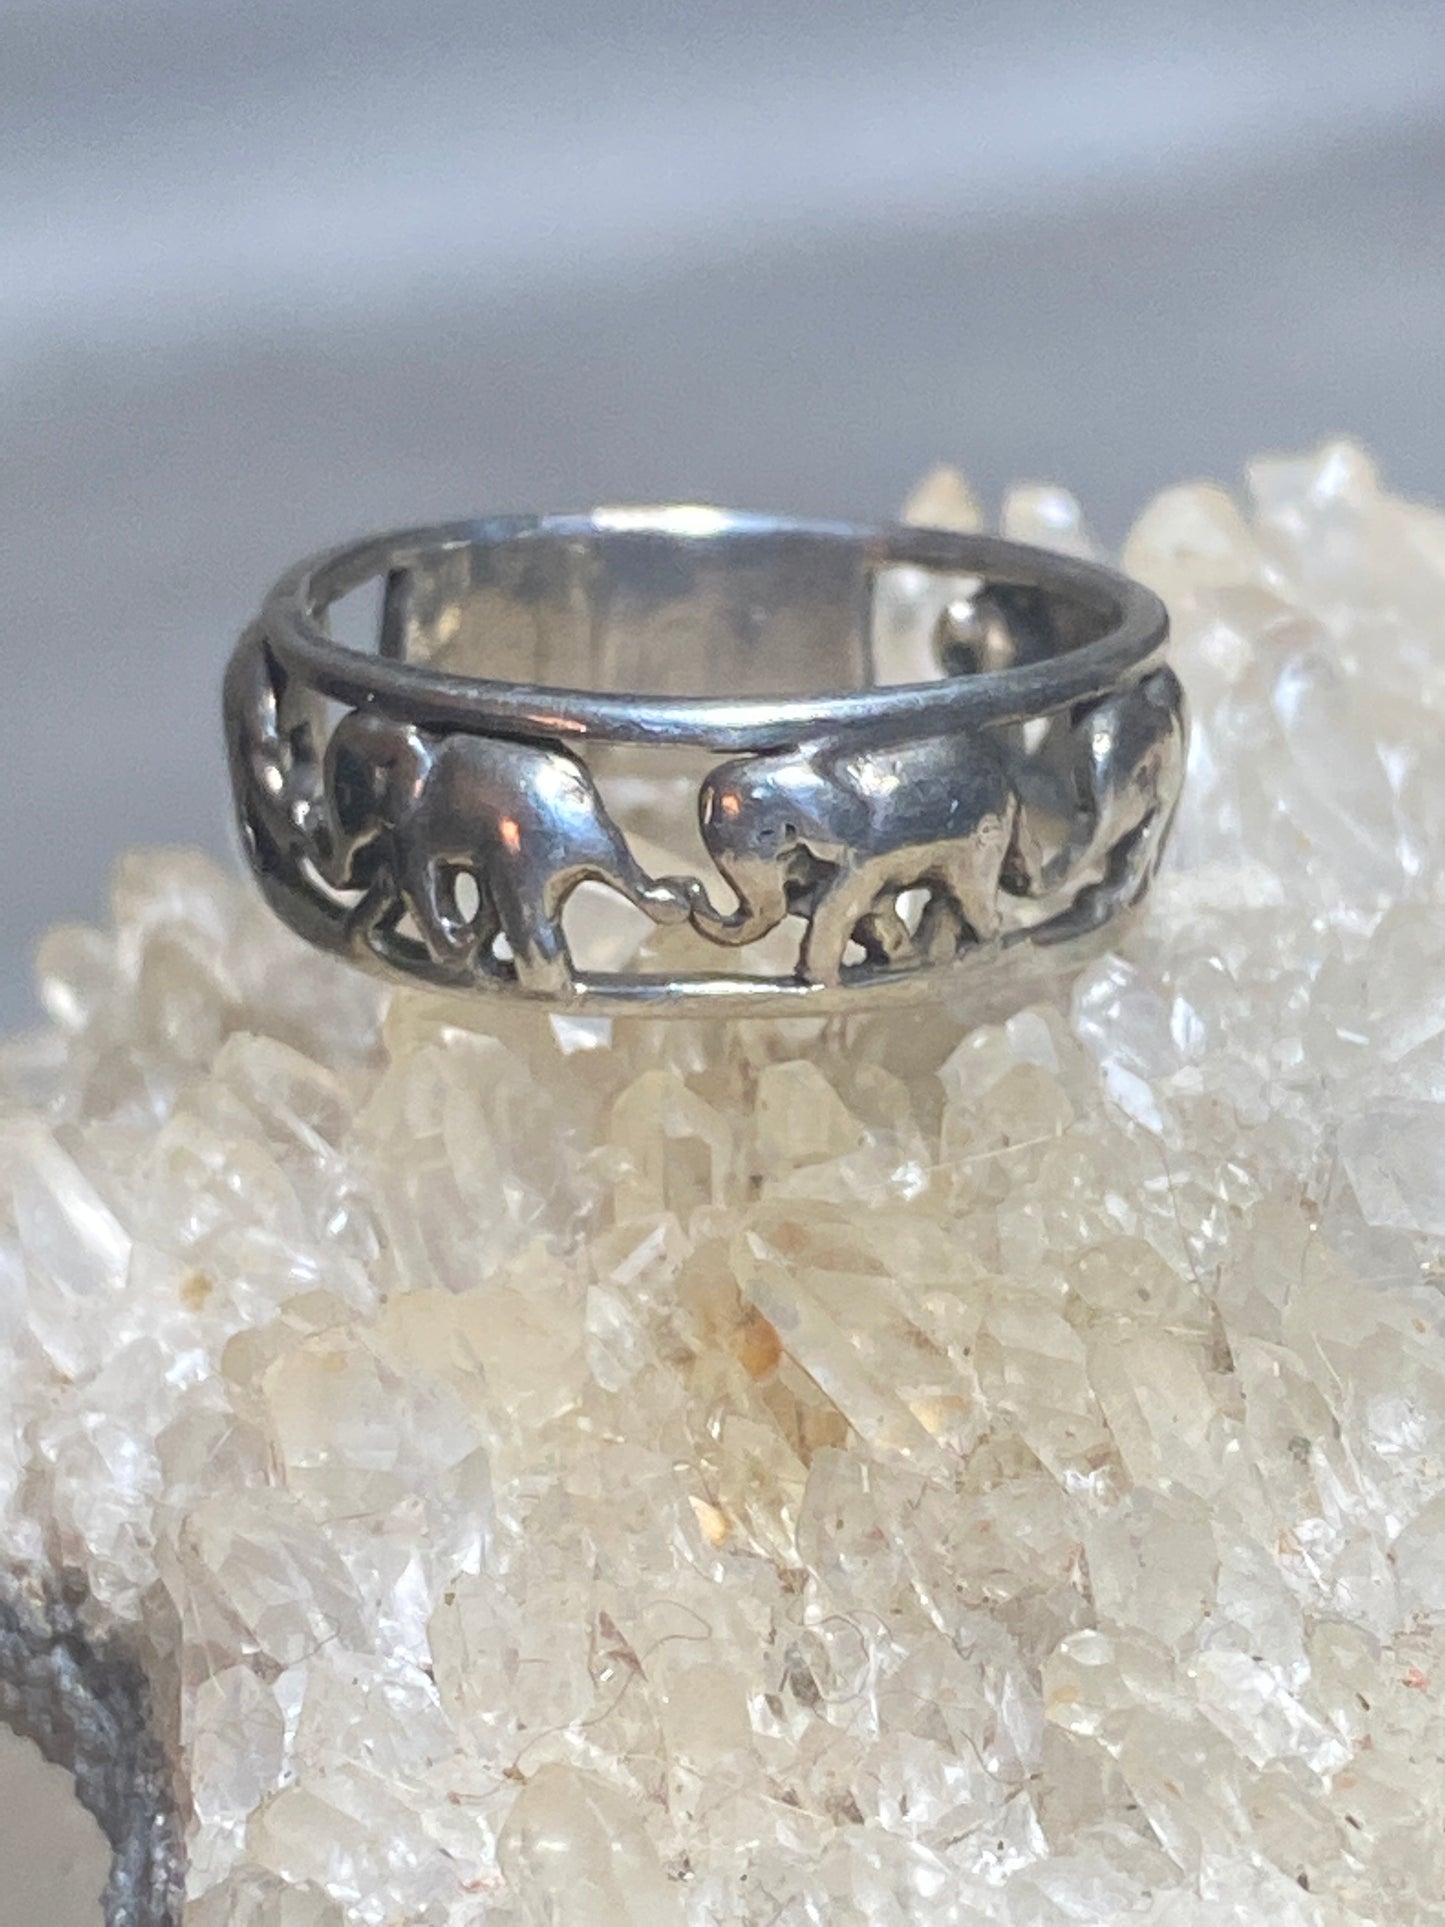 Elephant ring size 6.75 elephants parade band sterling silver women girls